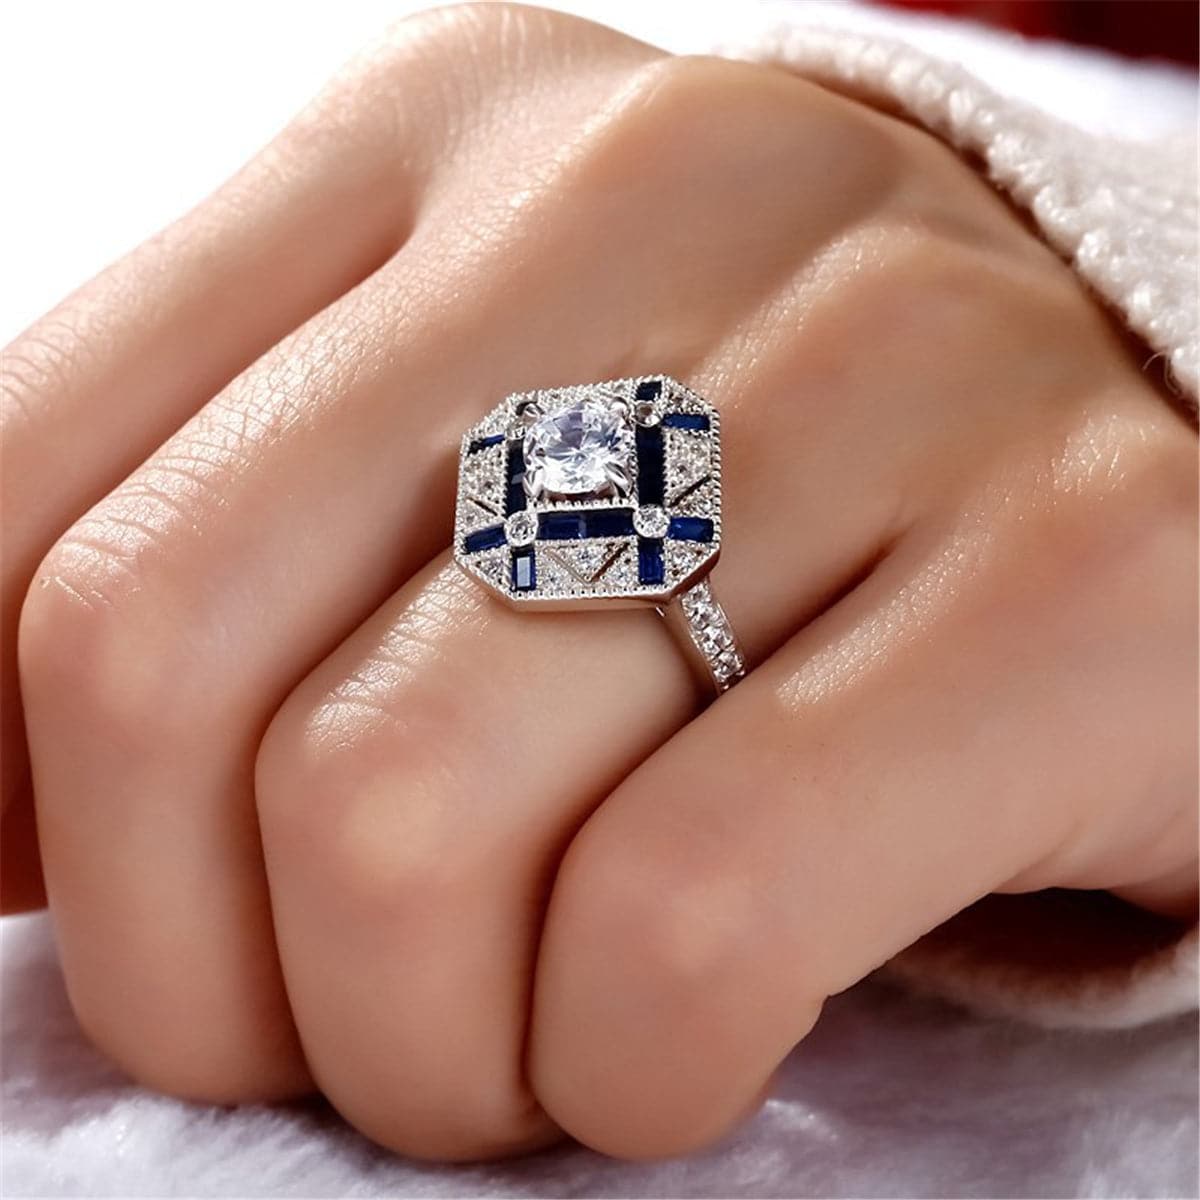 Blue Crystal & Cubic Zirconia Silver-Plated Shield Ring